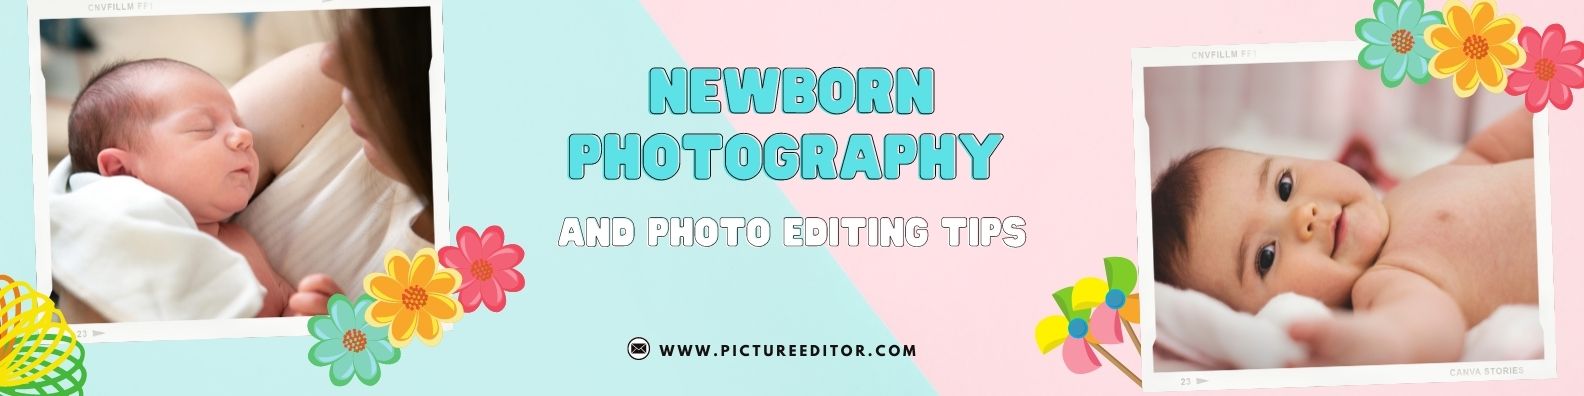 Newborn Photography And Photo Editing Tips